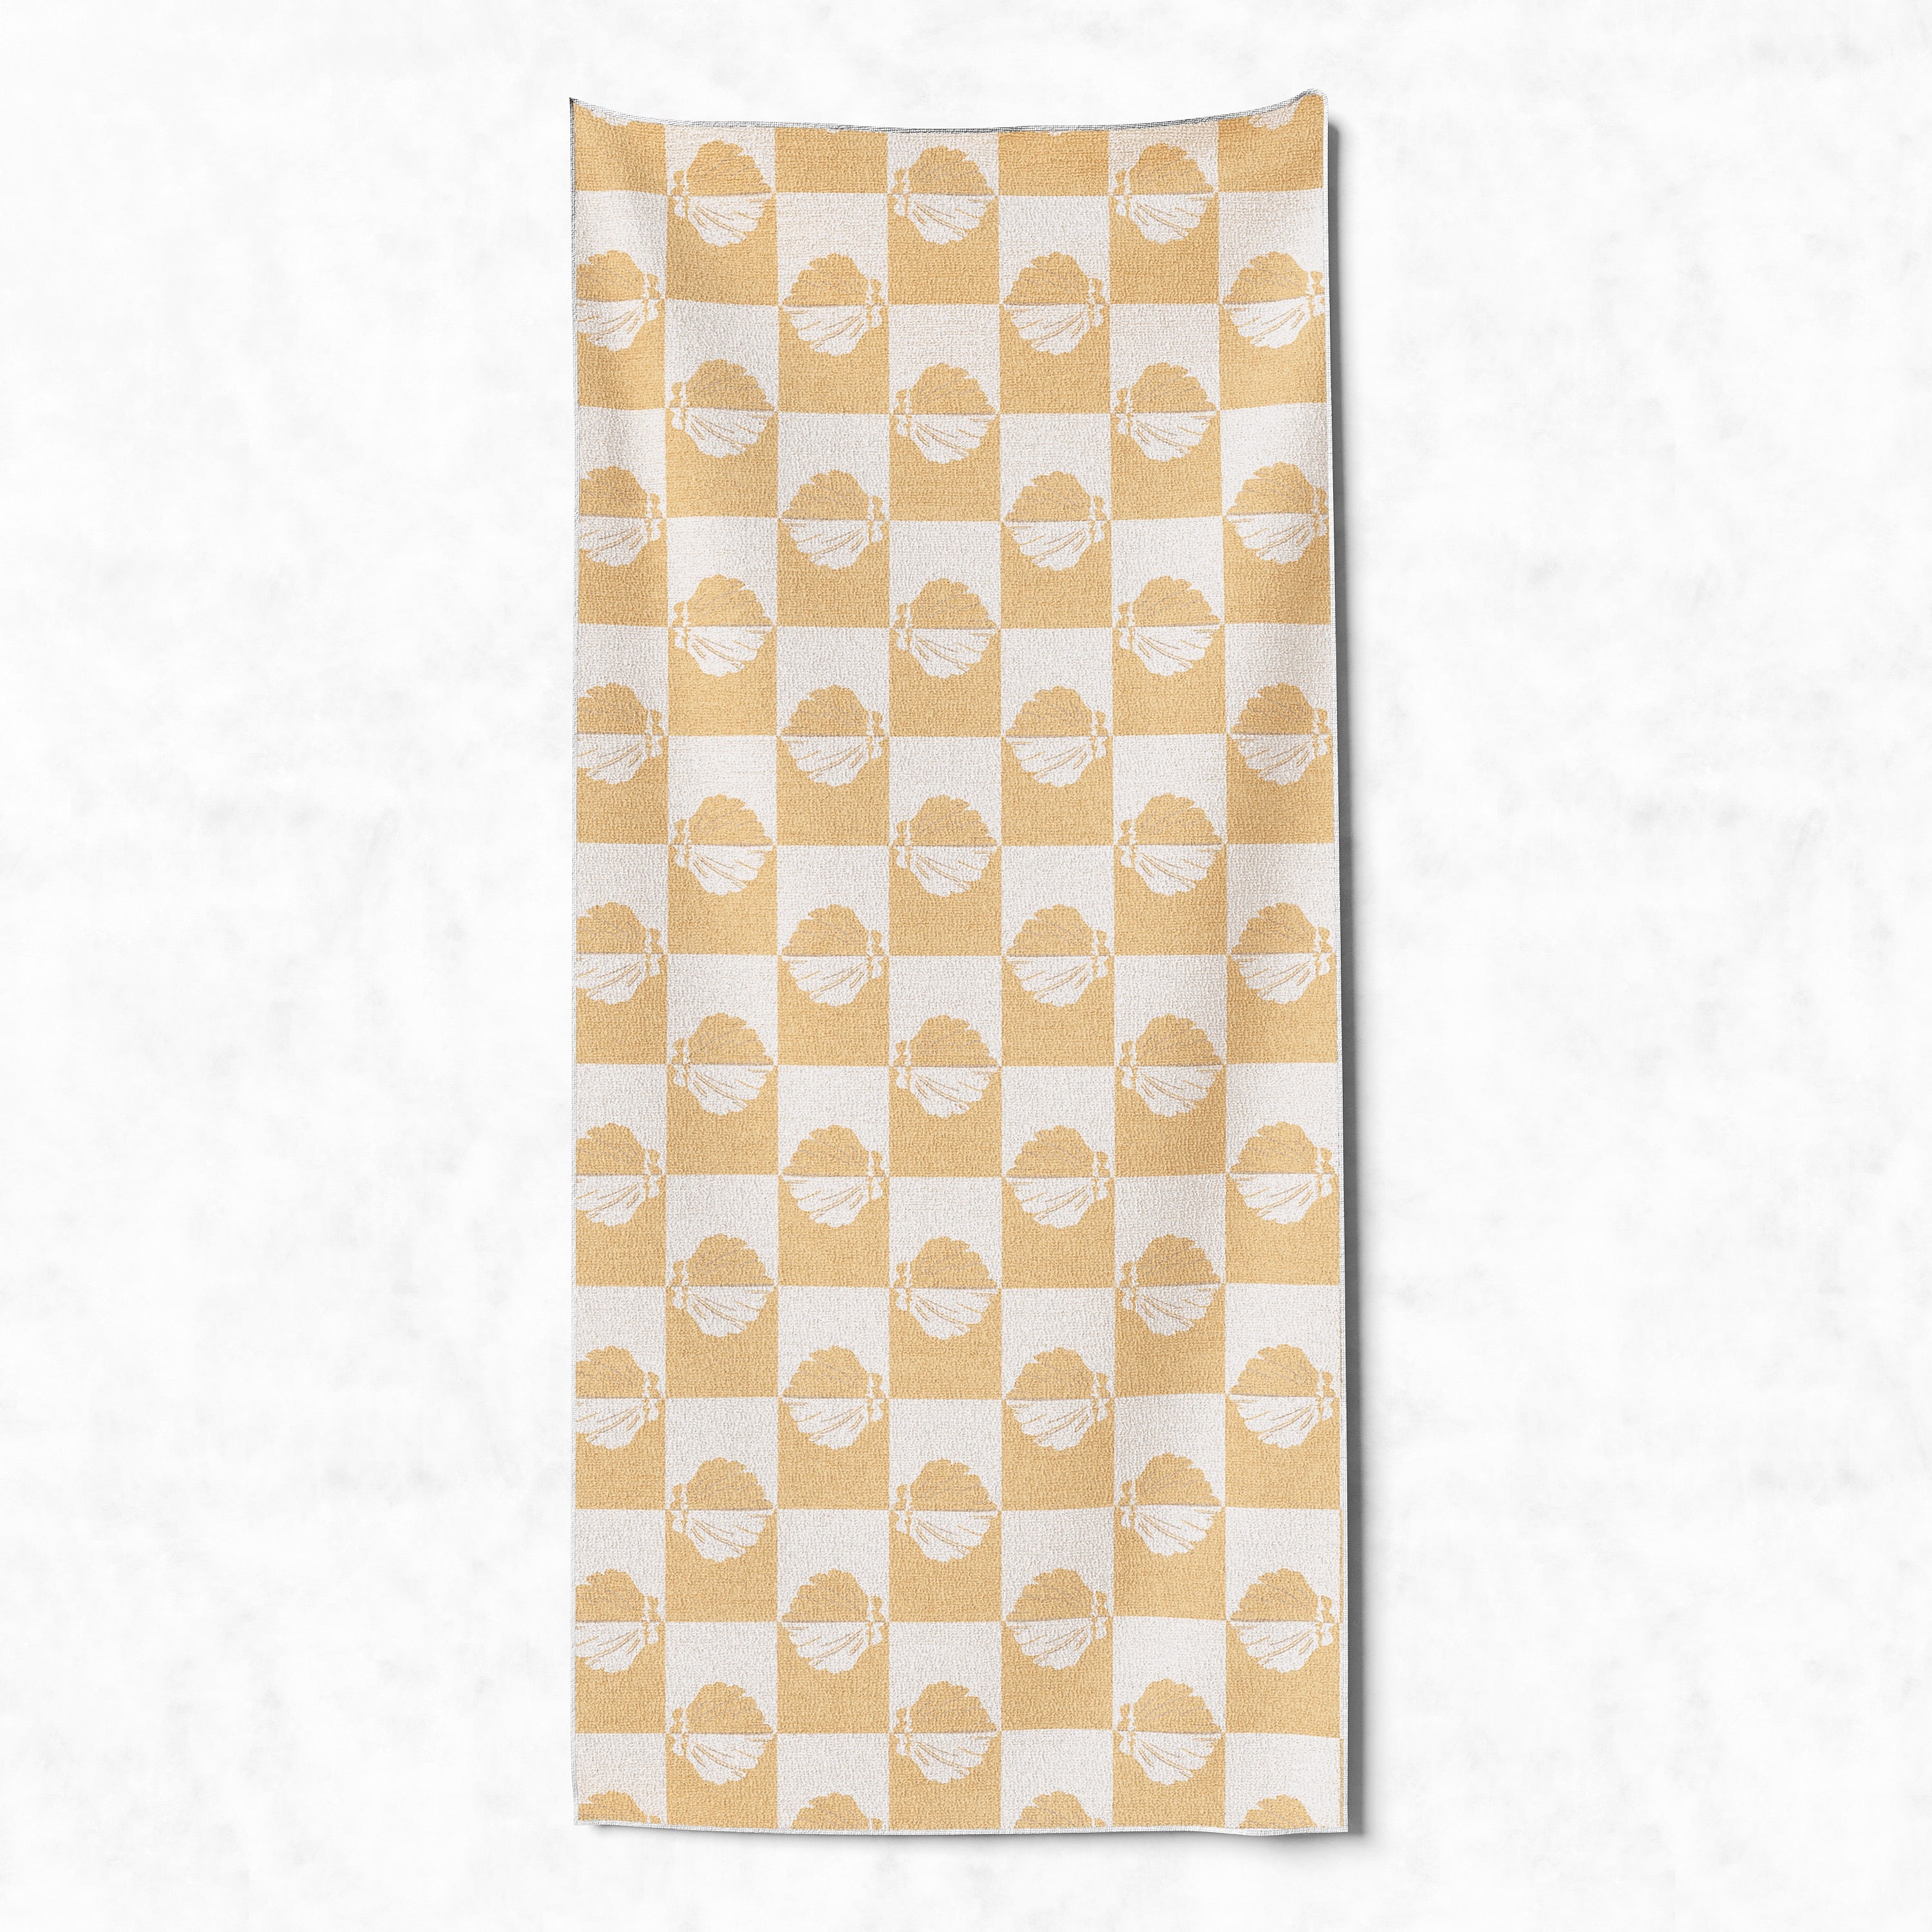 phuket brown margs beach towel nomadique pockets.png.png